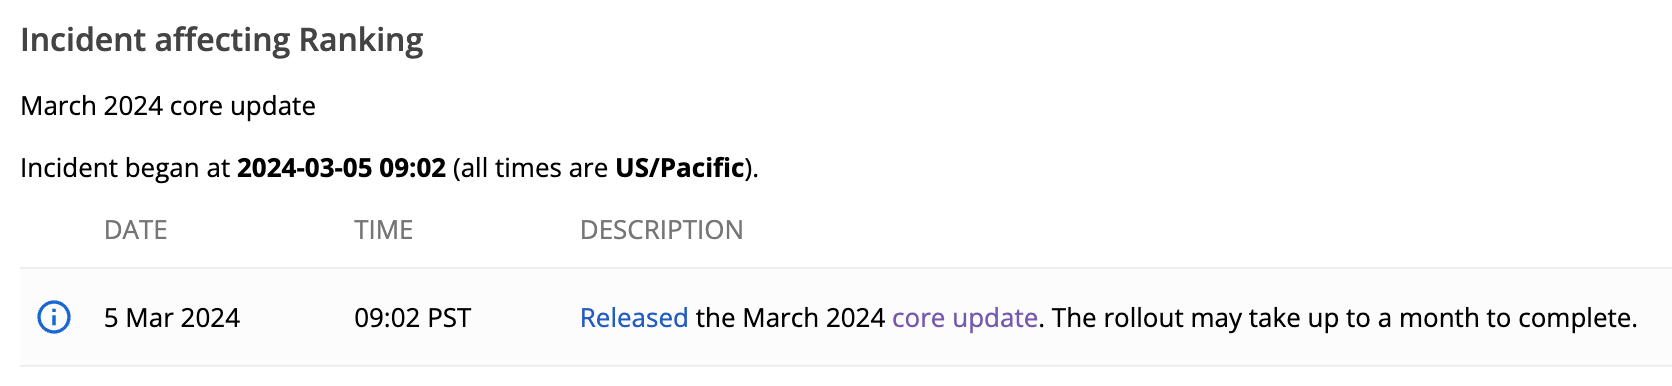 google search dashboard s،wing launch date of march 2024 core update